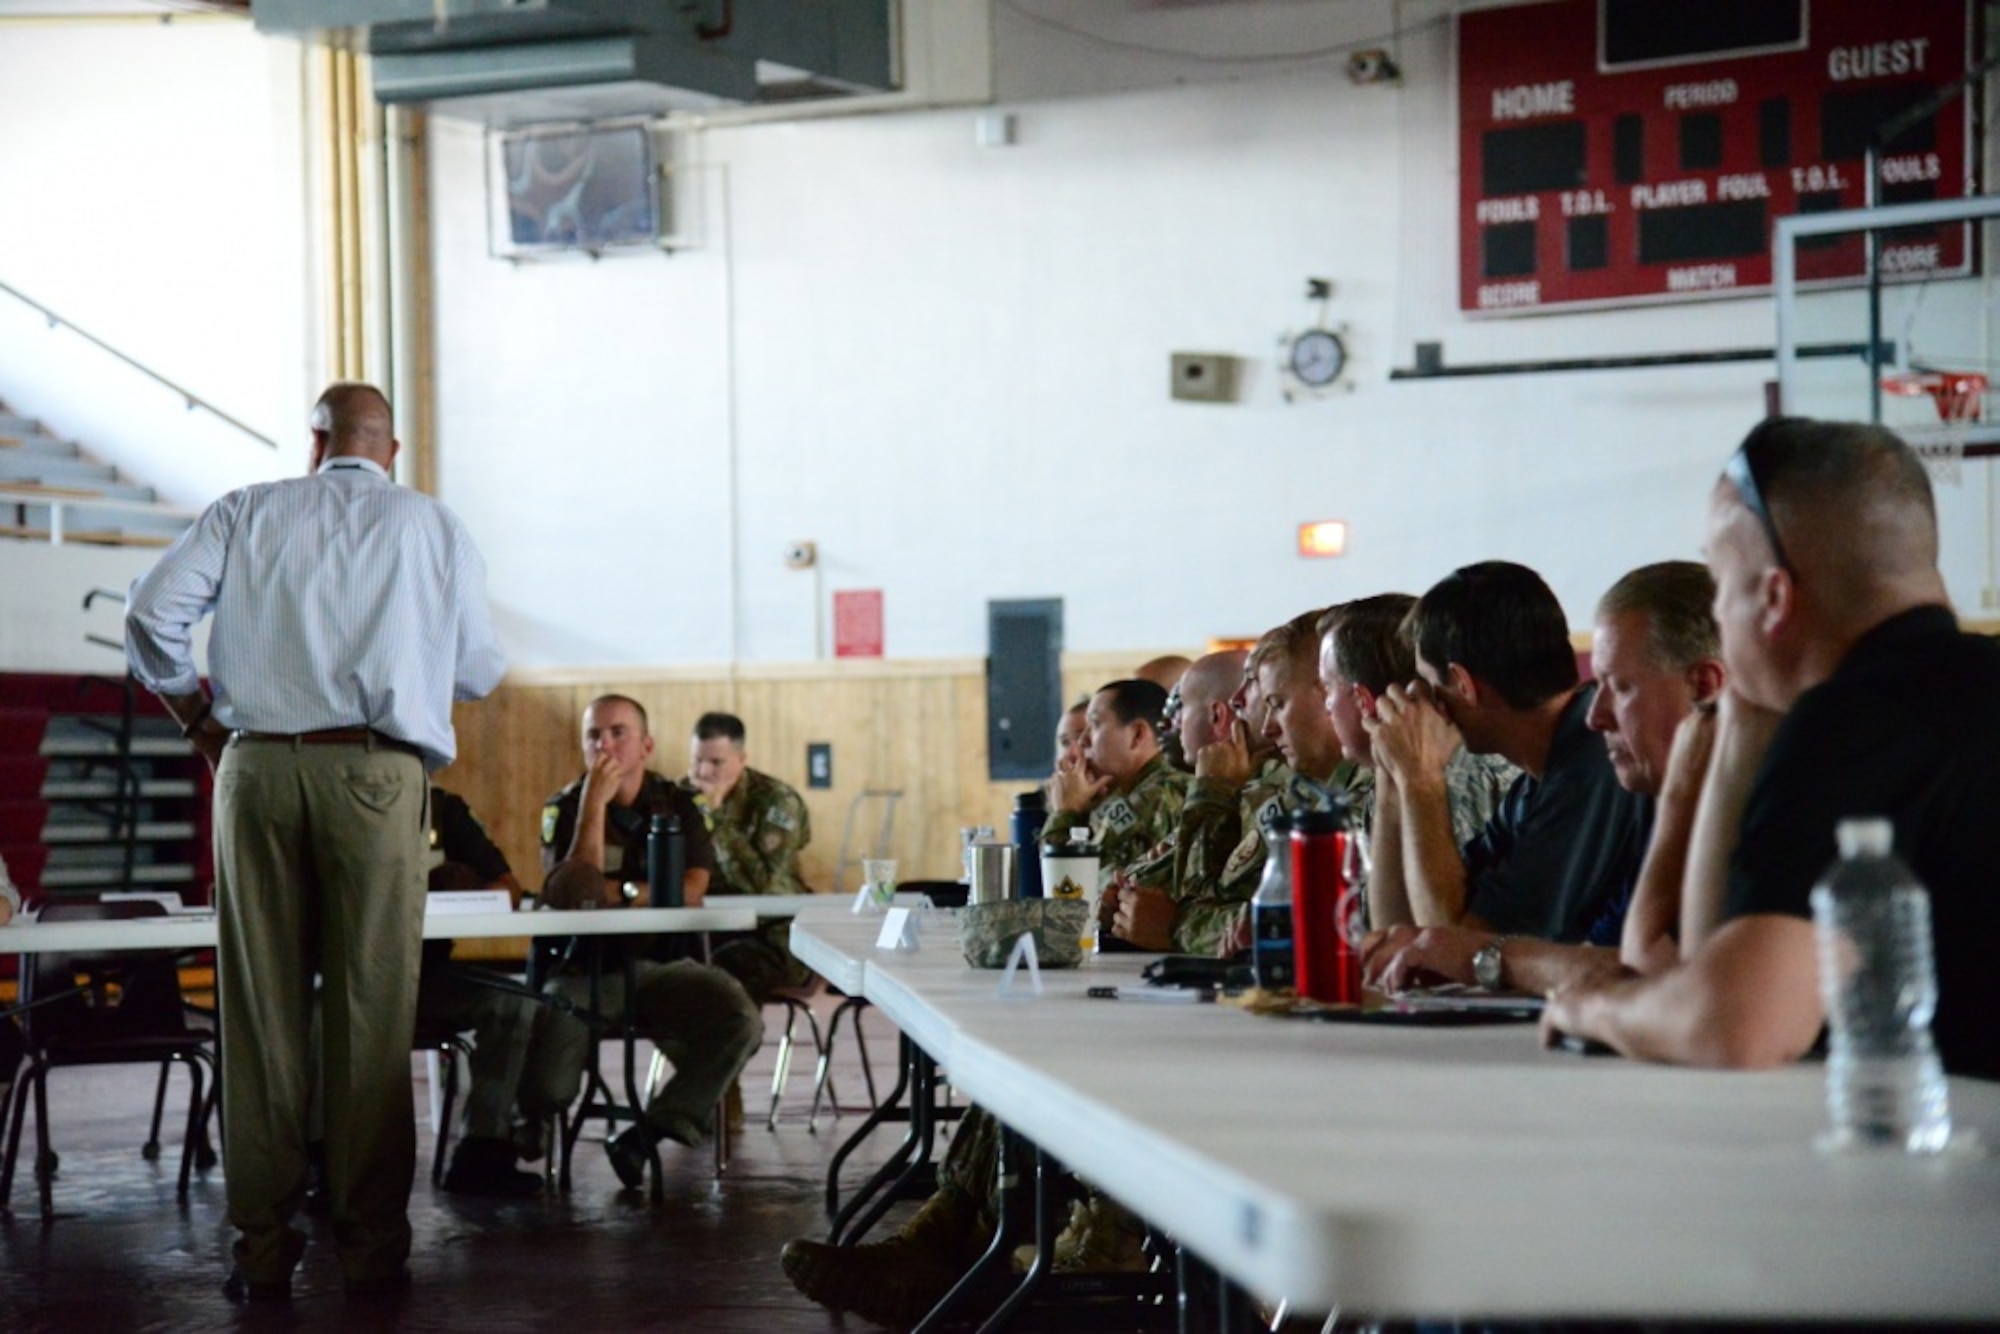 Community leaders group together during Local Integrated Response Plan community demonstrations to discuss plans for an exercise Aug. 14, 2018, at Fort Benton, Mont. LIRP is a combined effort between local agencies such as law enforcement and volunteer departments with nearby military organizations. (U.S. Air Force photo by Airman 1st Class Tristan Truesdell)